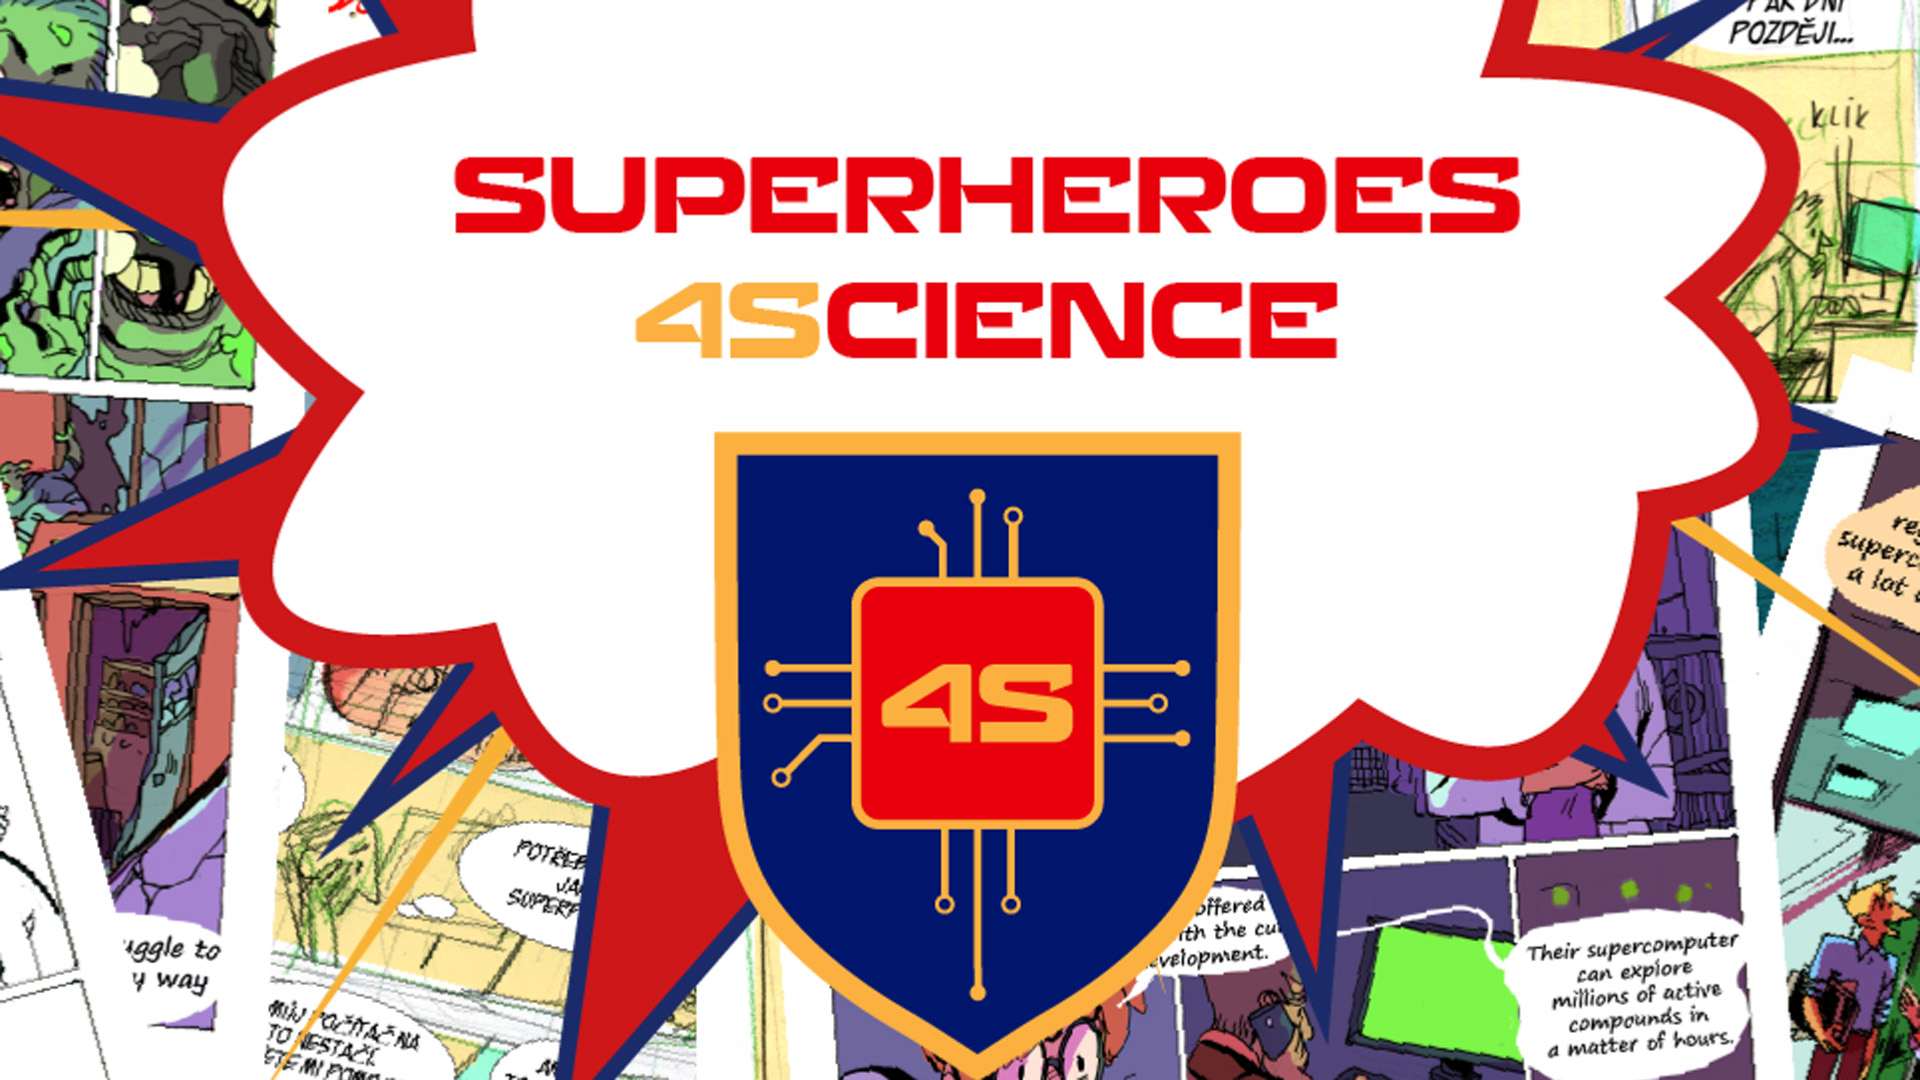 Final meeting of Superheroes 4 Science project